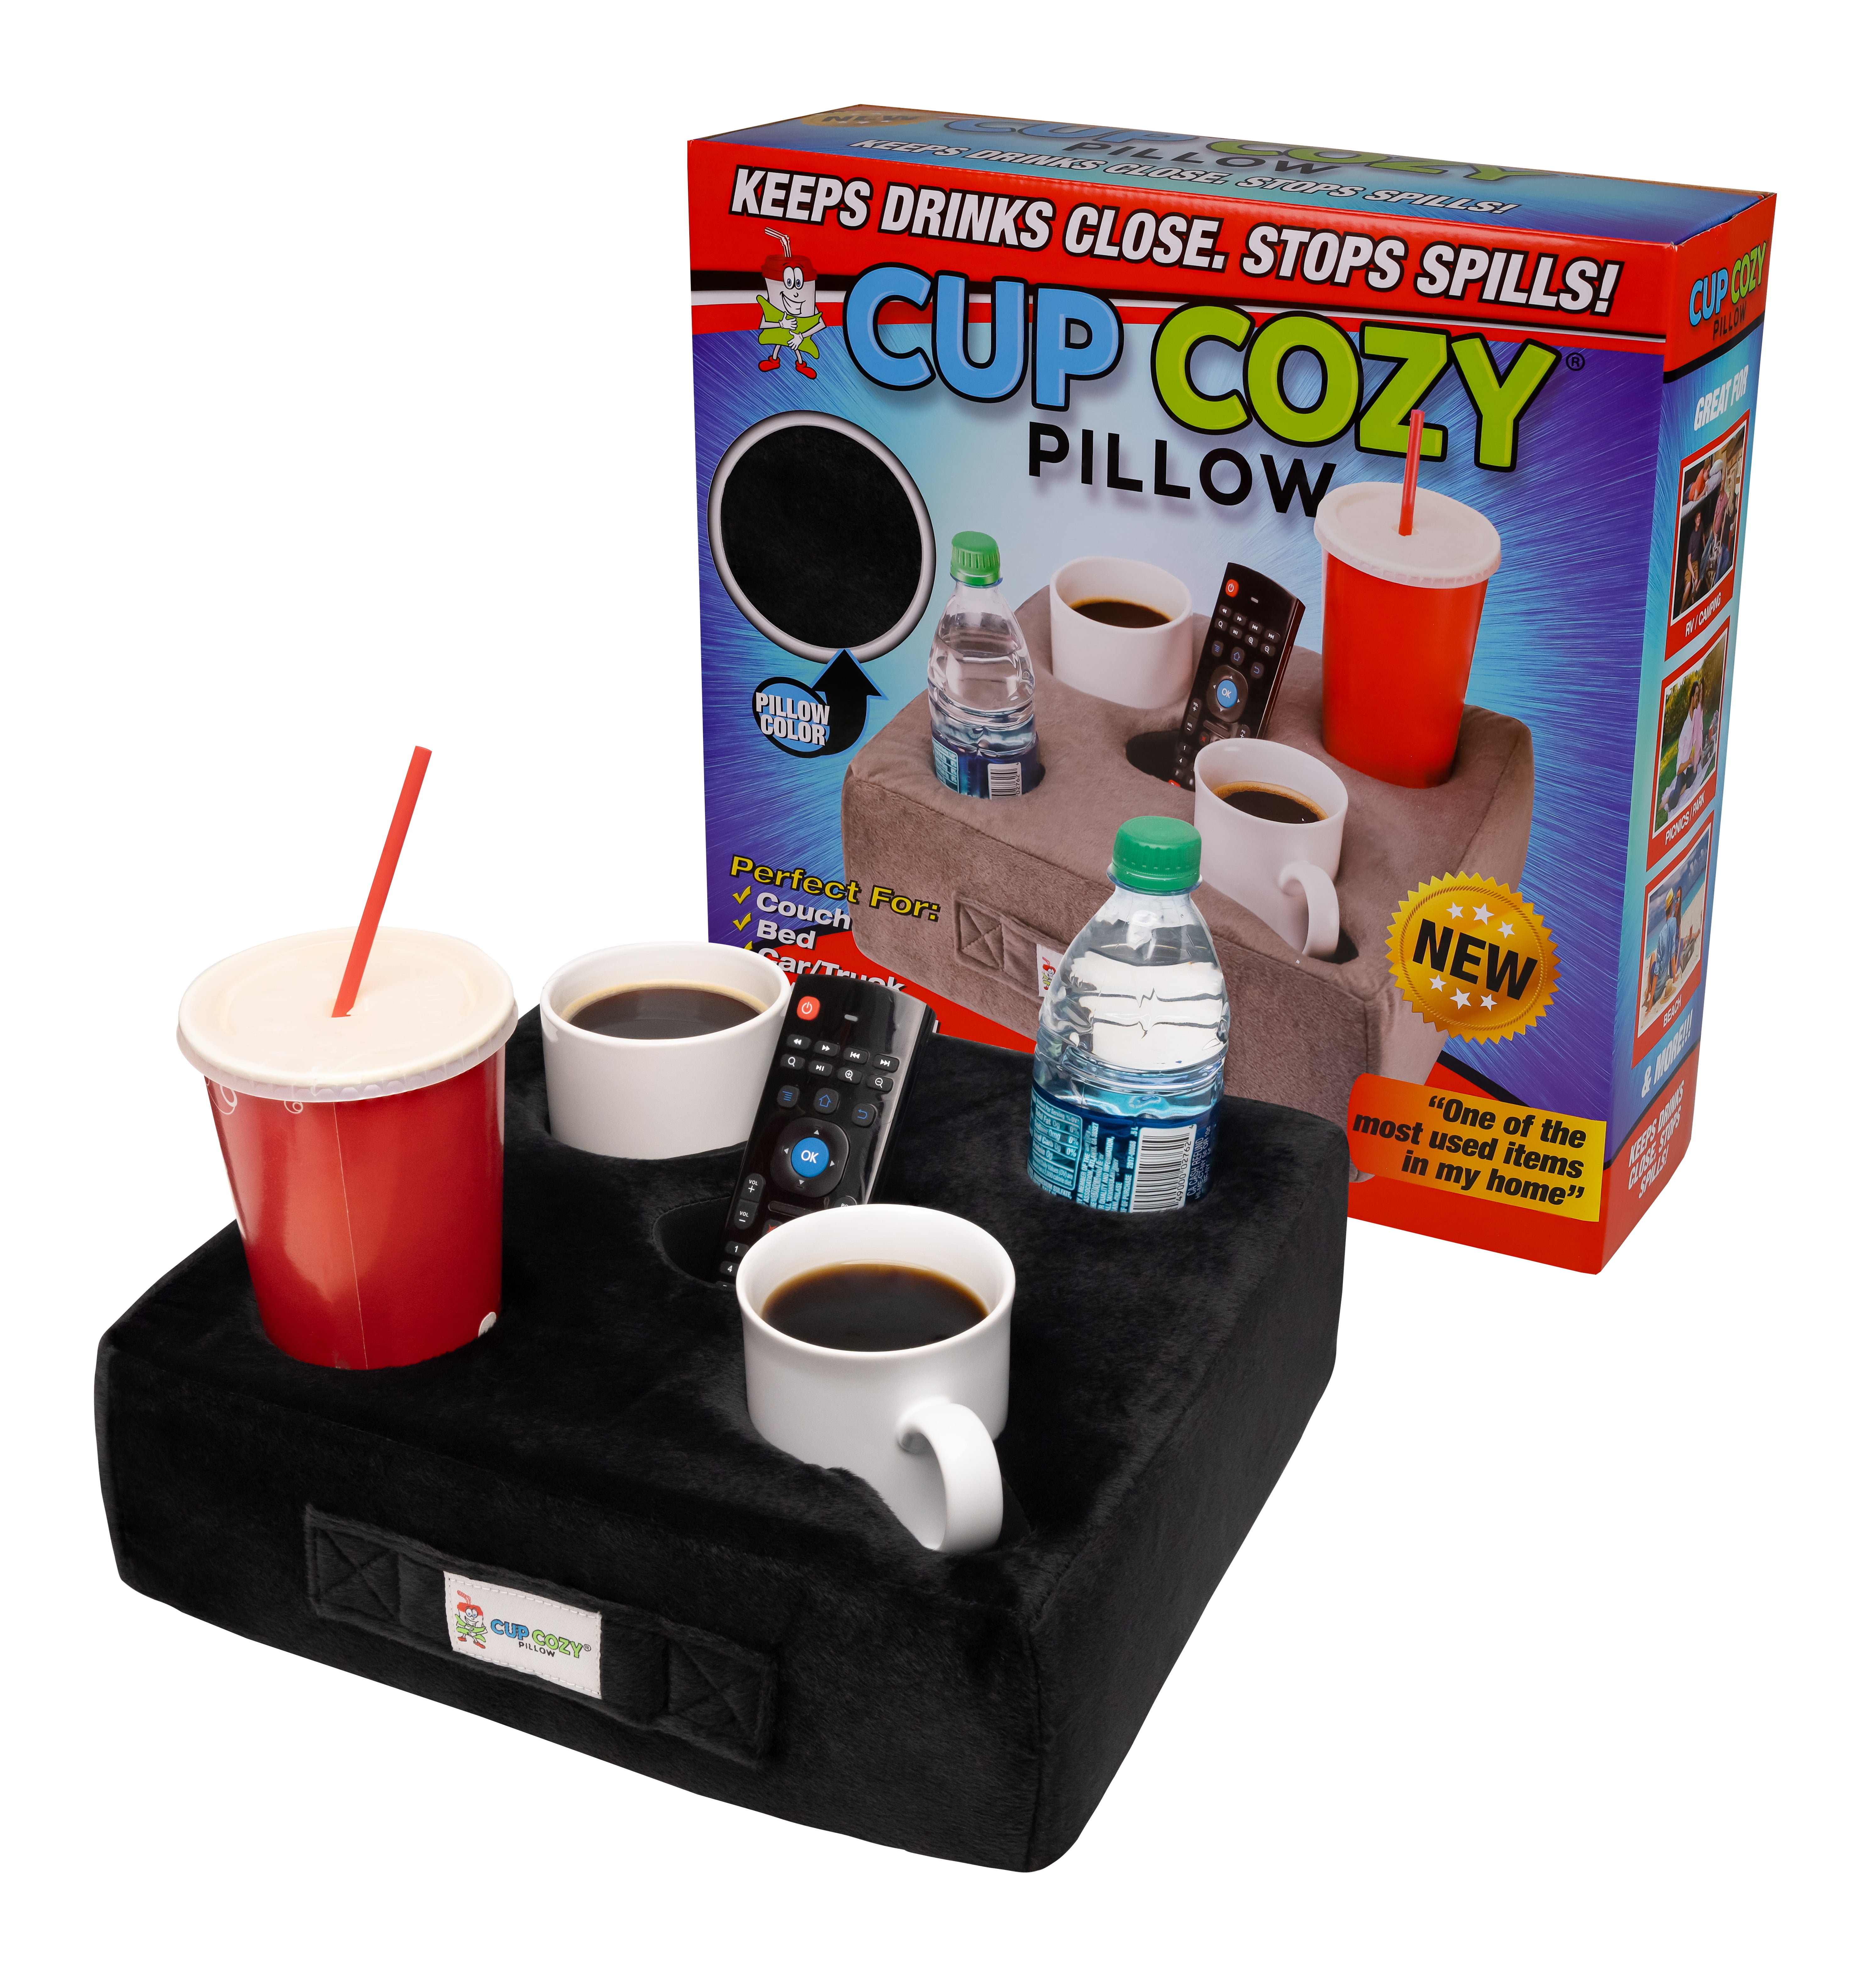 We recently got a rolling cup holder at my store and don't have a